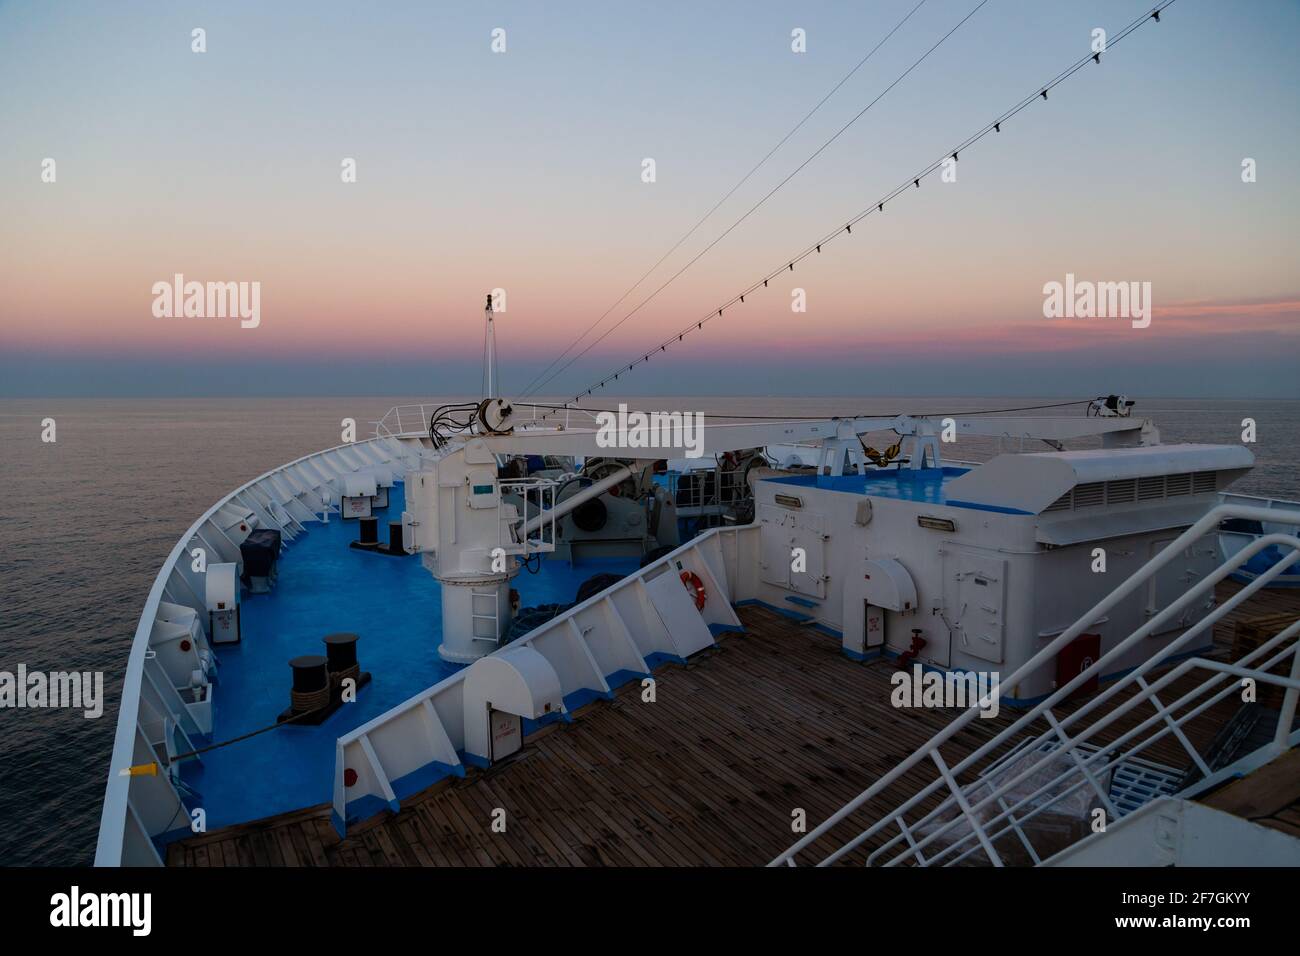 Bow of a passenger cruise ship moving in the open sea. View from the top, port side of the ship Stock Photo